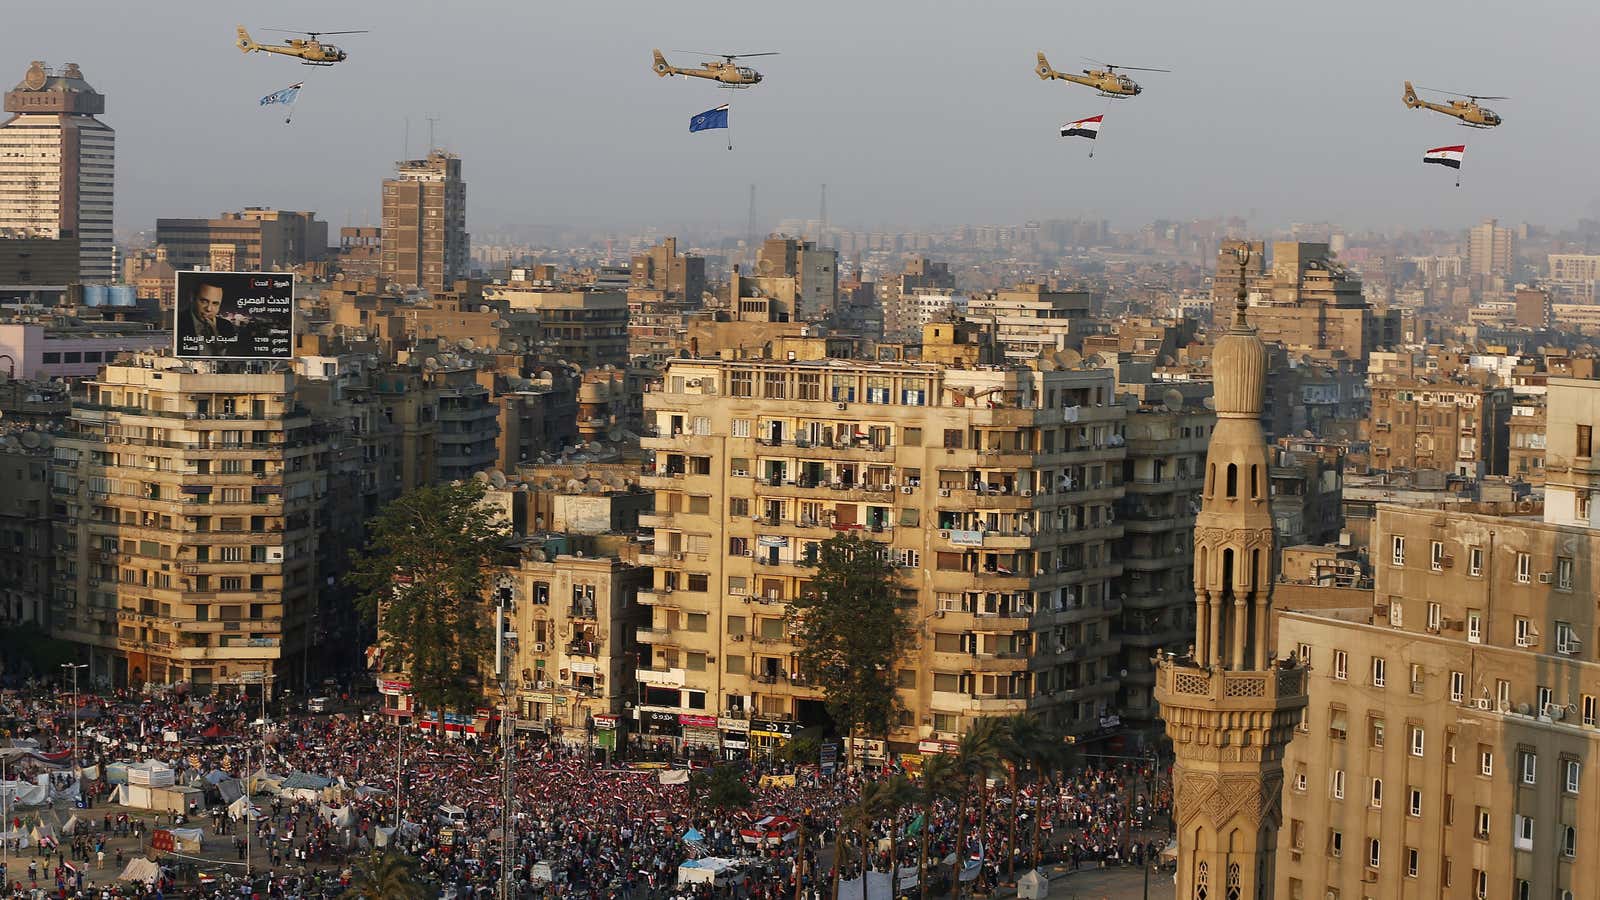 A fly-past over protesters against ousted Egyptian President Mohamed Mursi, in Tahrir Square in Cairo July 4, 2013.